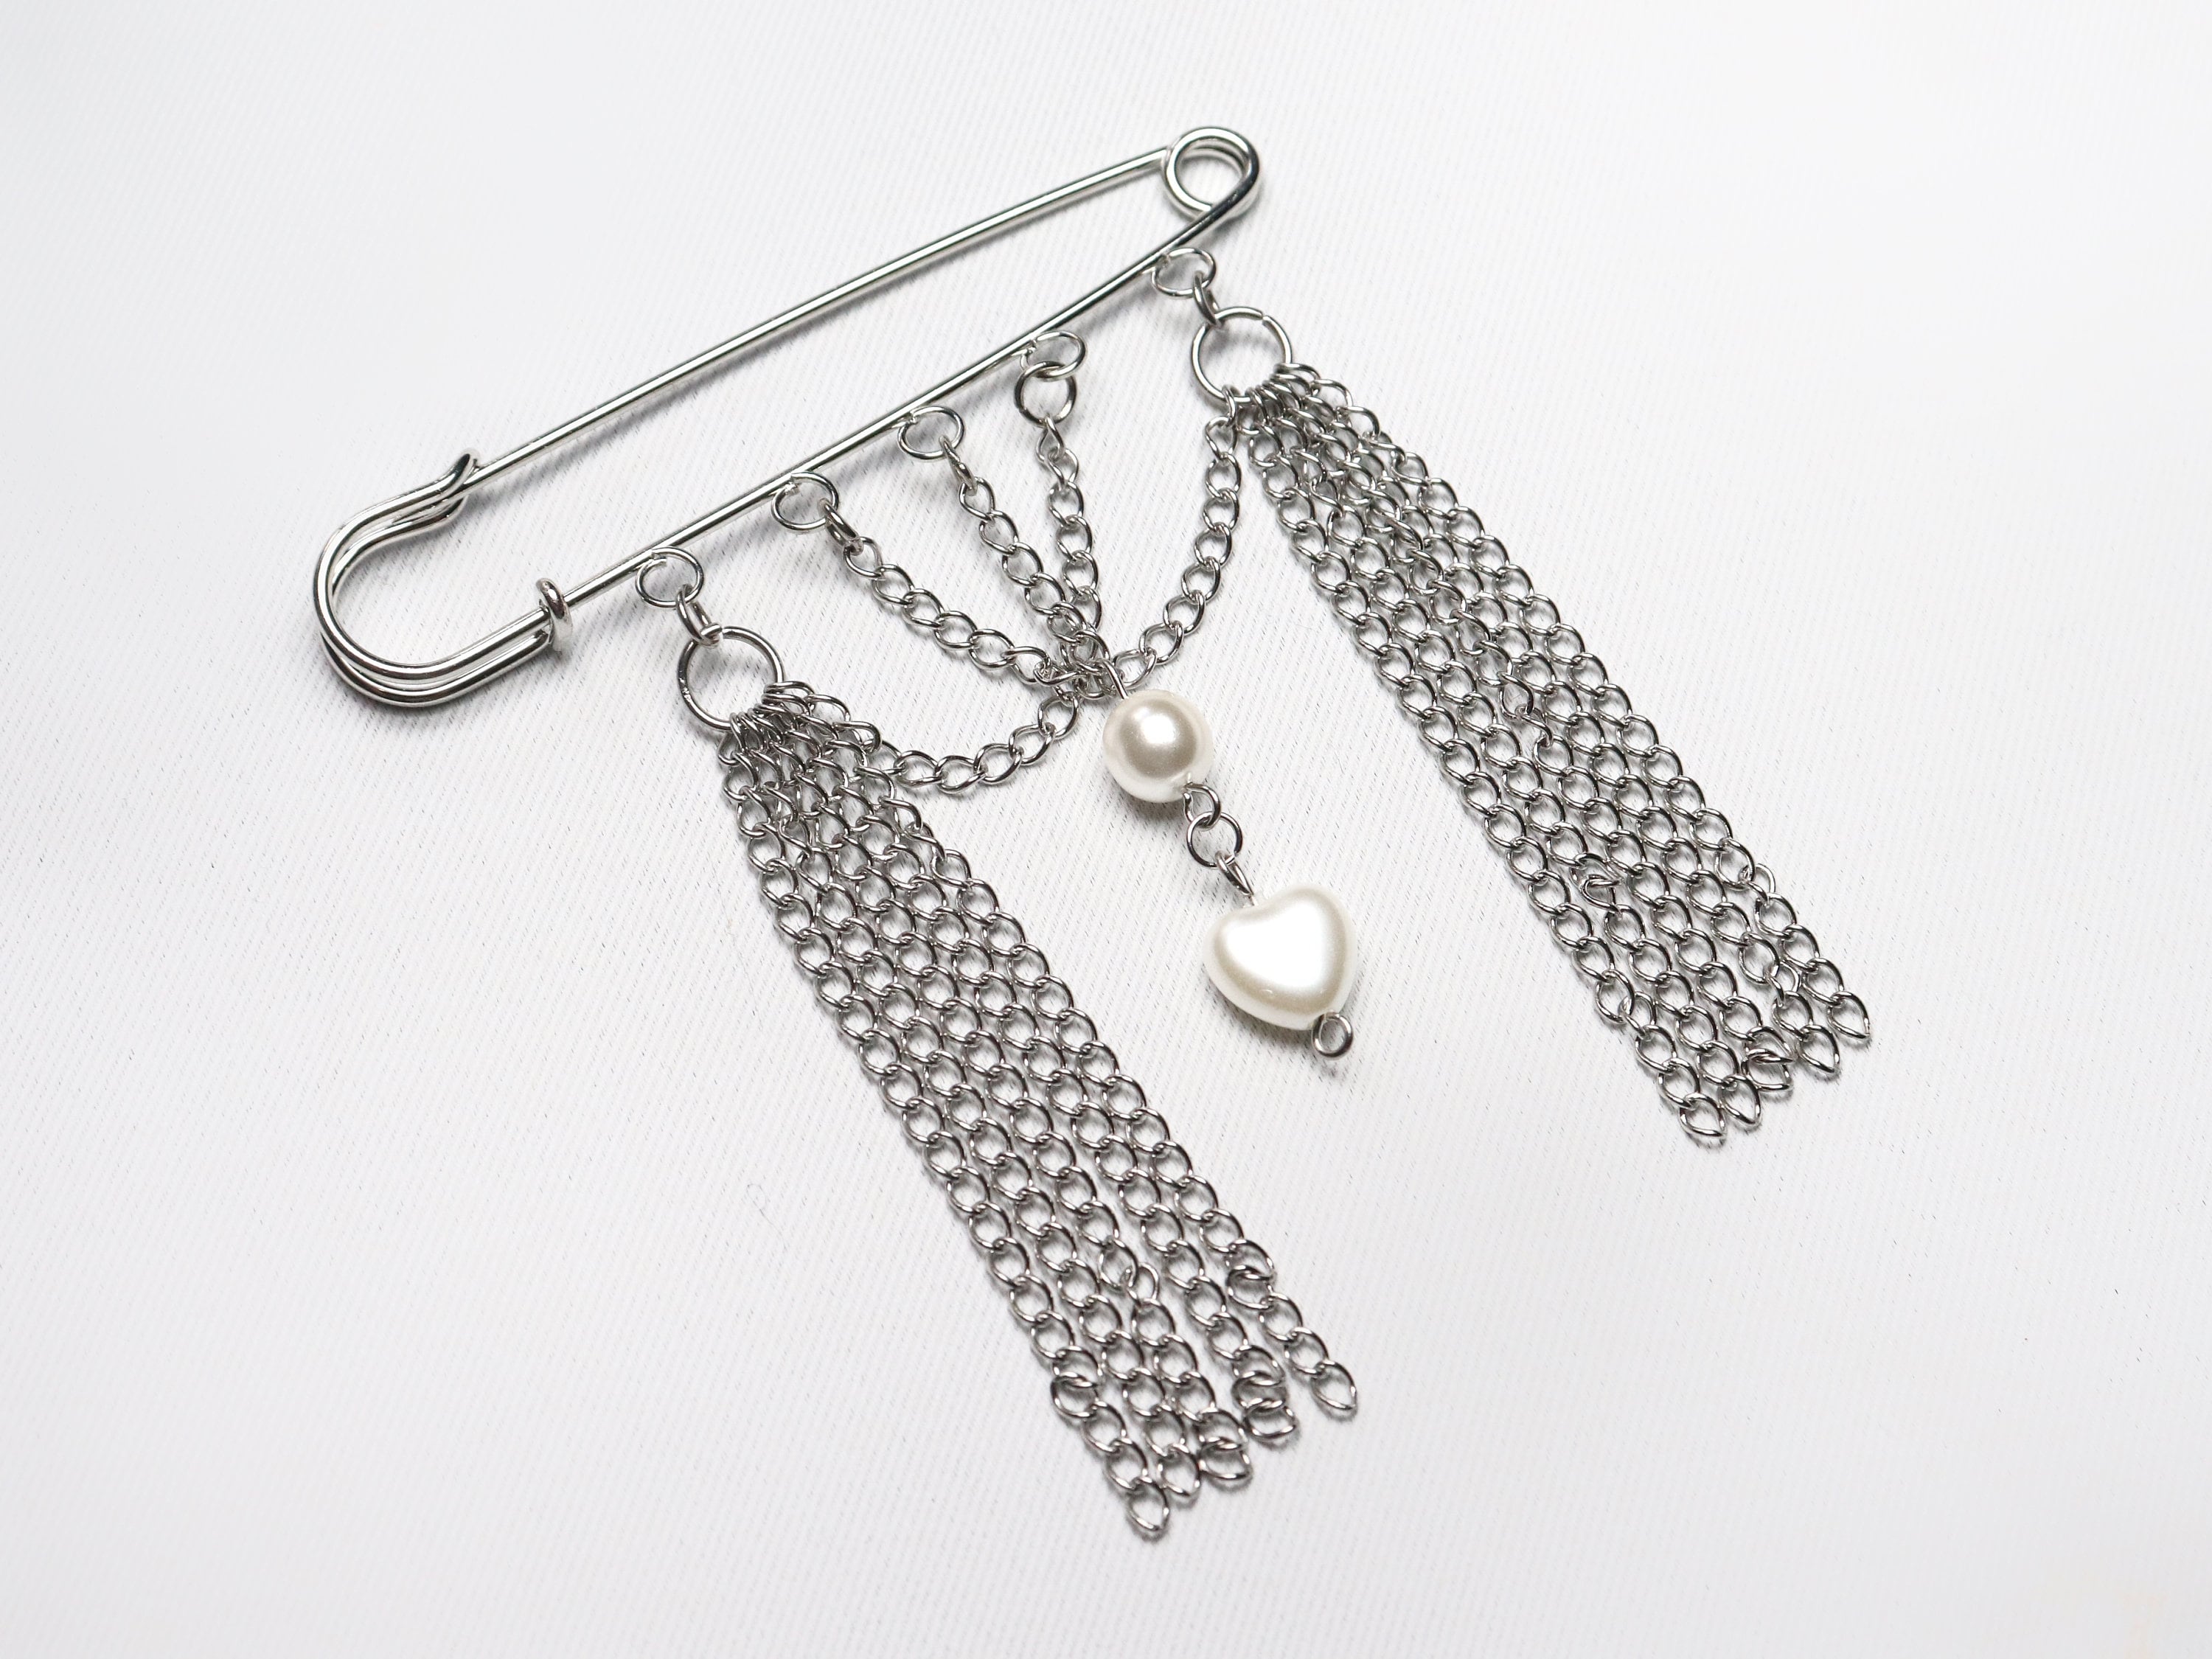 Safety Pin Brooch With Small Chains and Pearls 